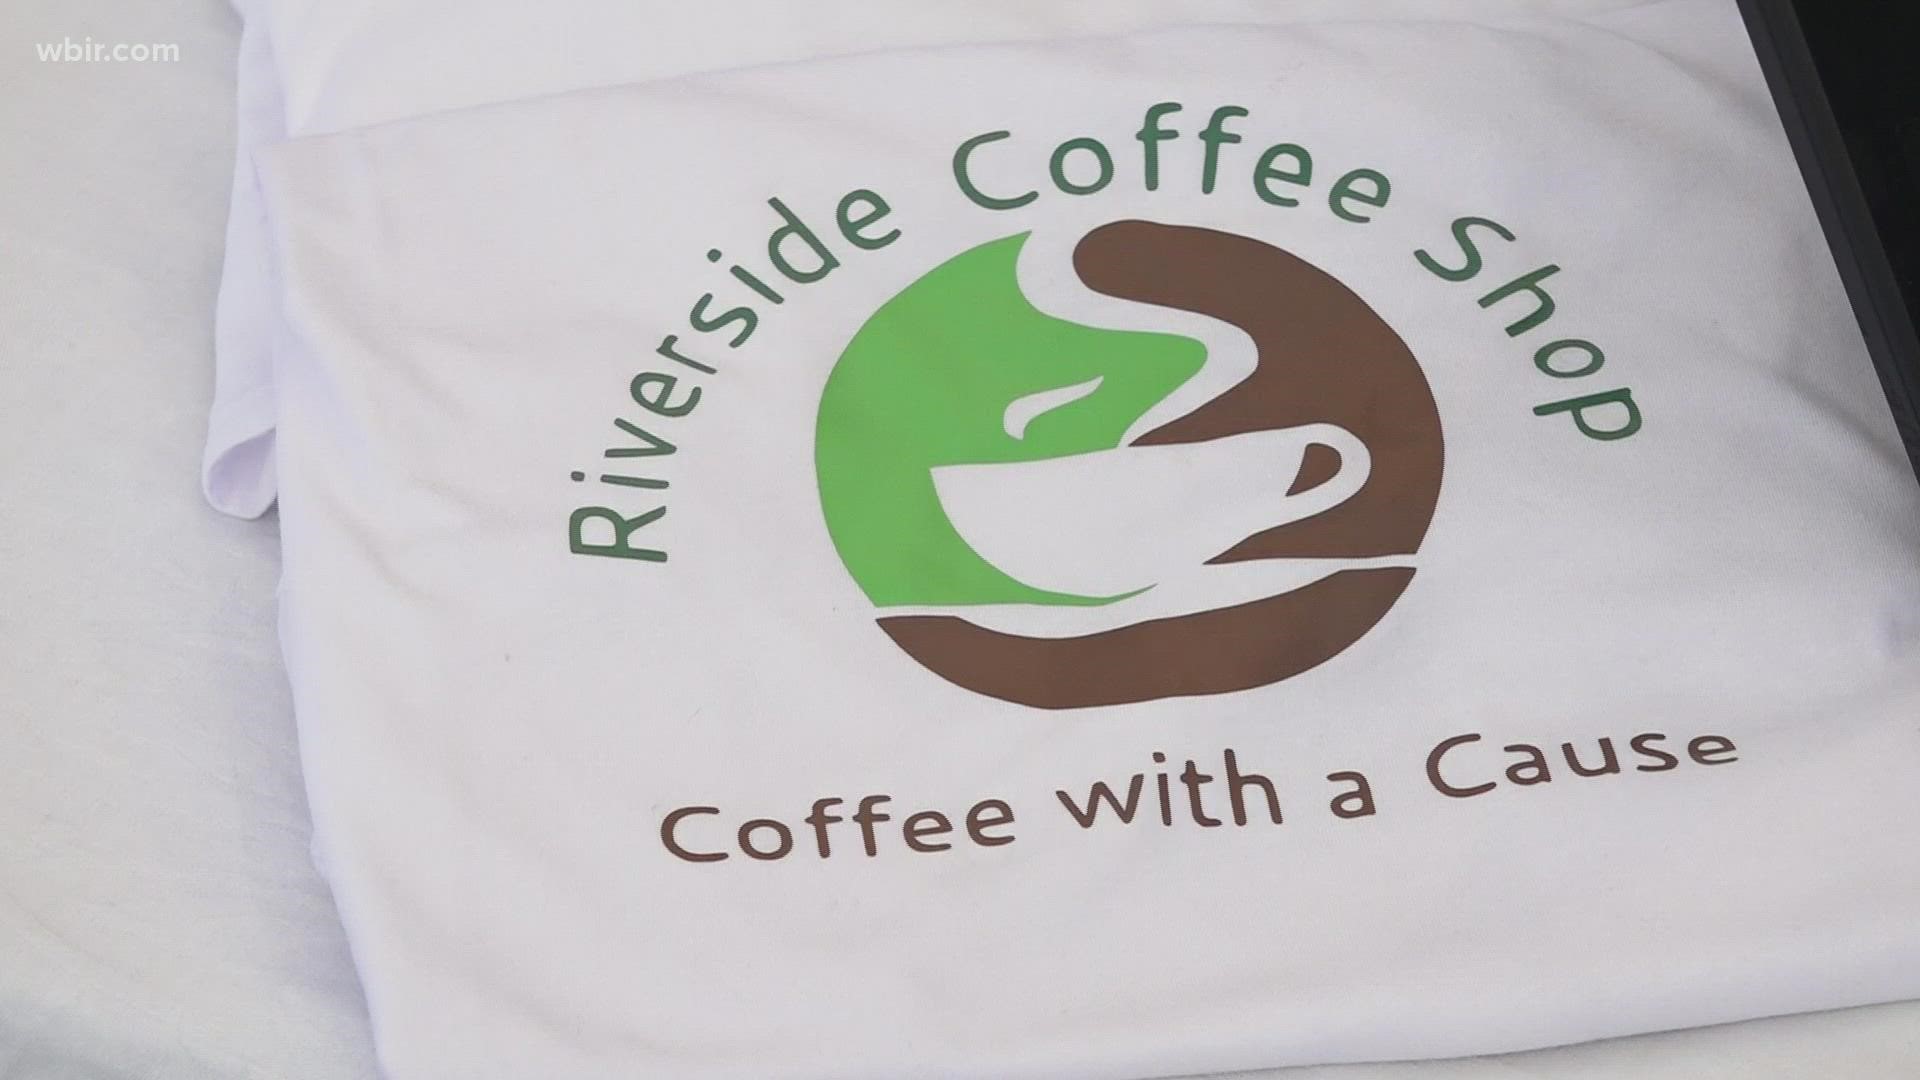 A new coffee shop in Lenoir City aims to be a learning lab for teens with Down syndrome and autism to get job experience.